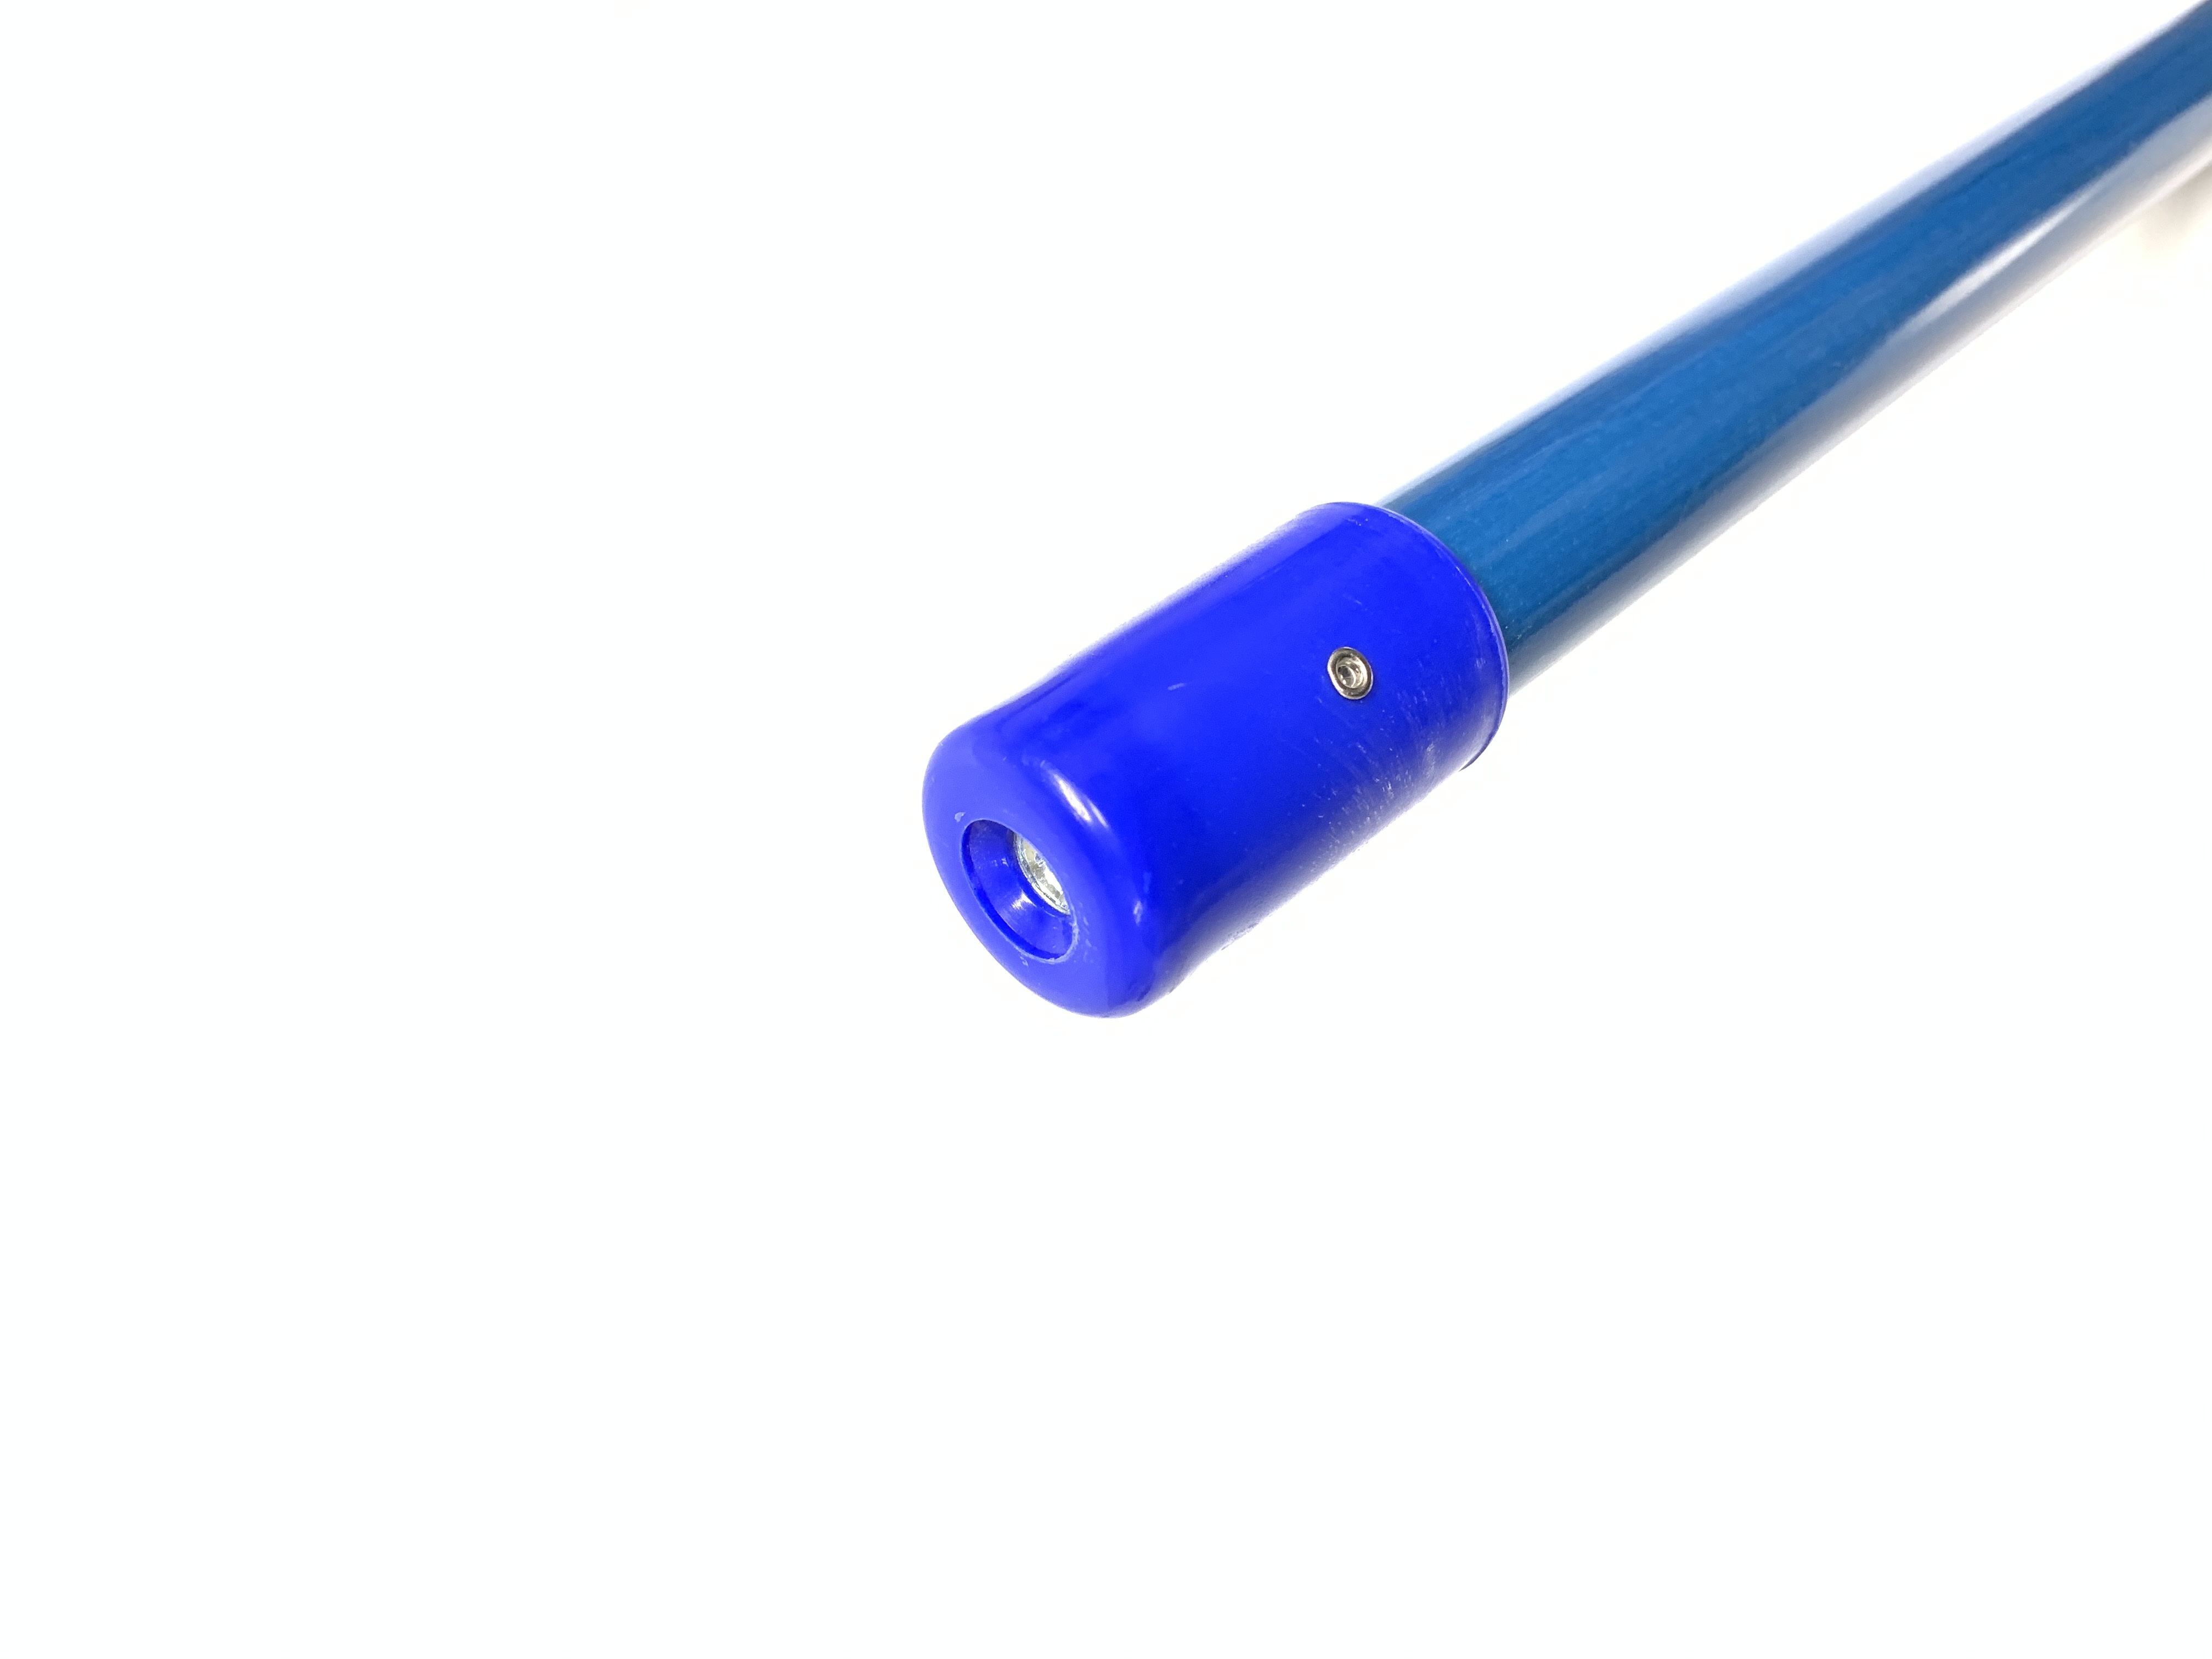 Mop Handle, 60&quot;L,
screw-type(female), with end
grip, lightweight,
fiberglass, blue, Made in USA, 
EACH,12/21